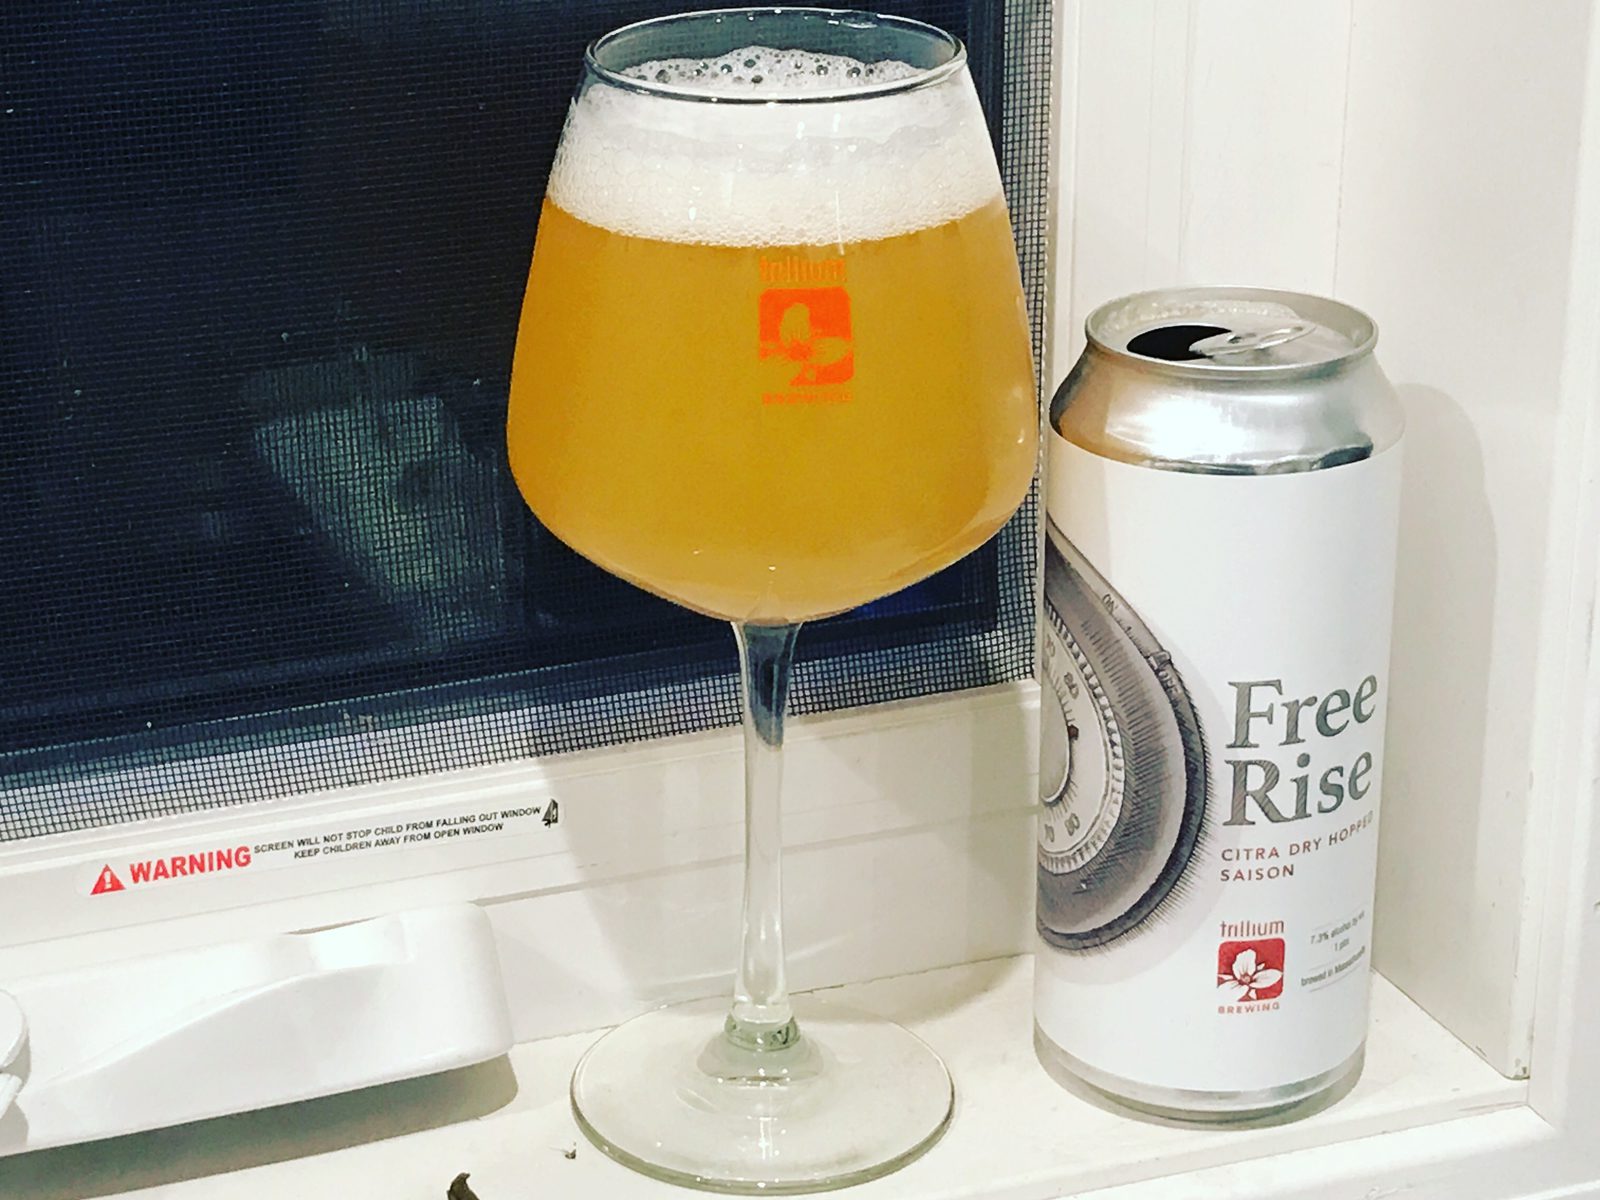 Trillium Brewing Company: Free Rise Dry-Hopped with Citra